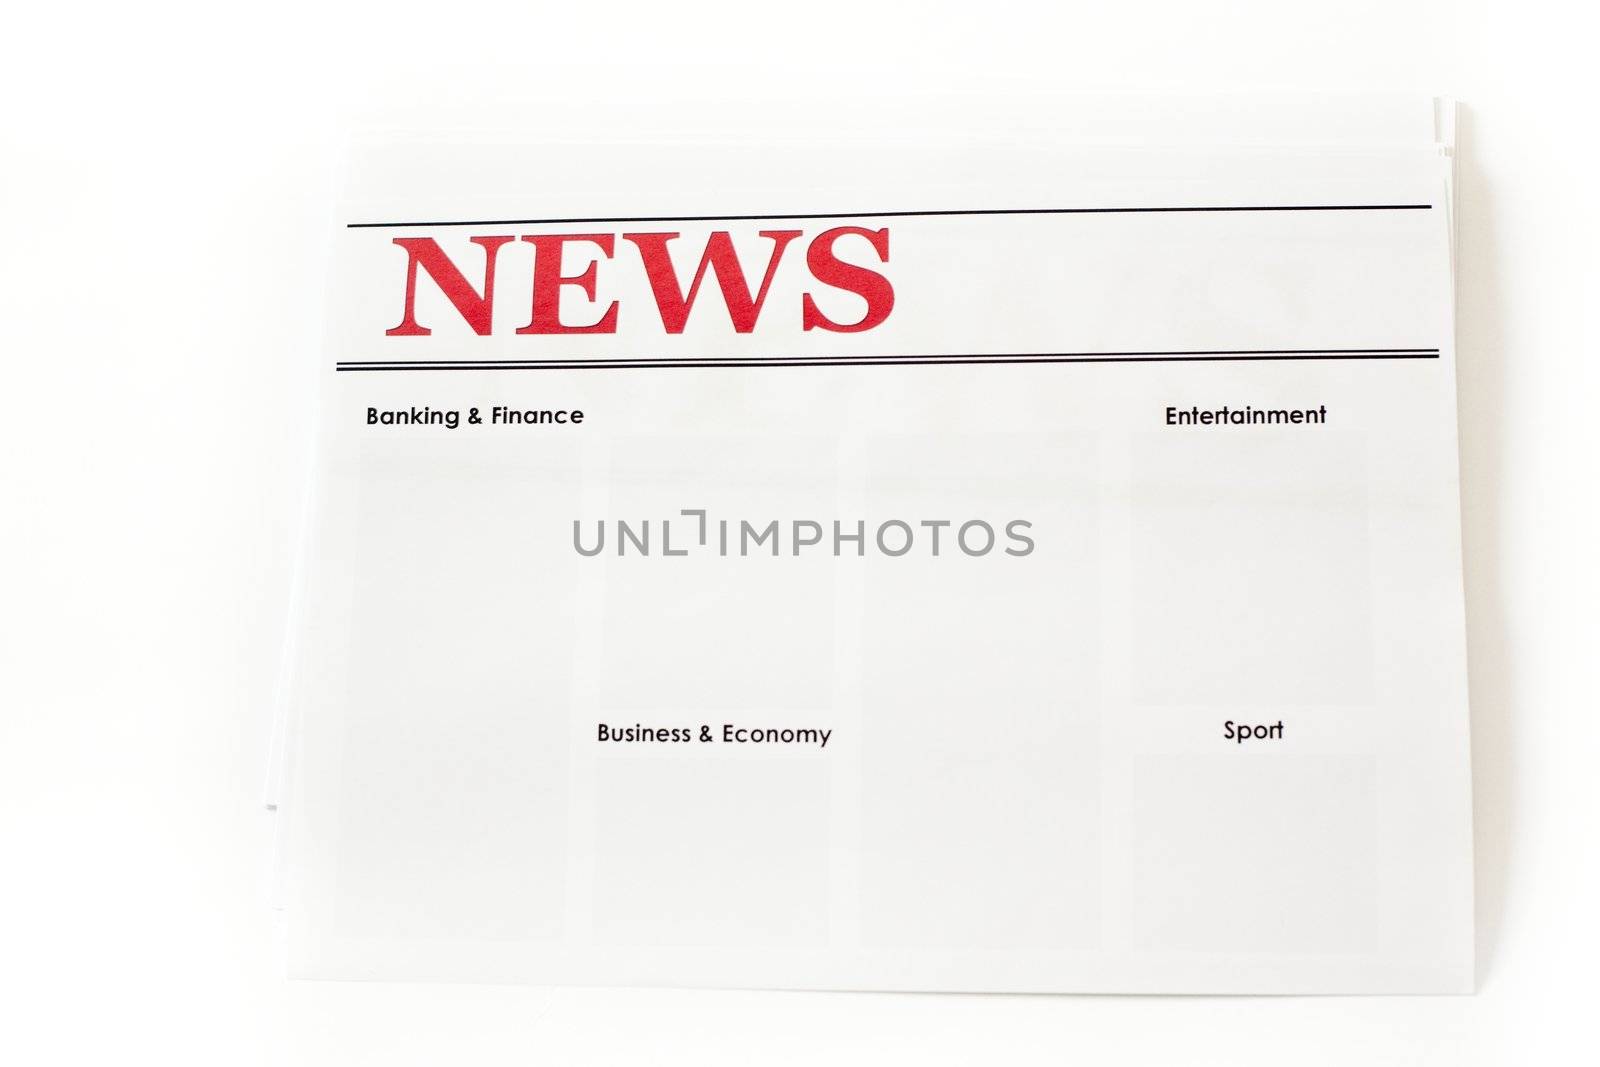 An image of headlines of a newspaper